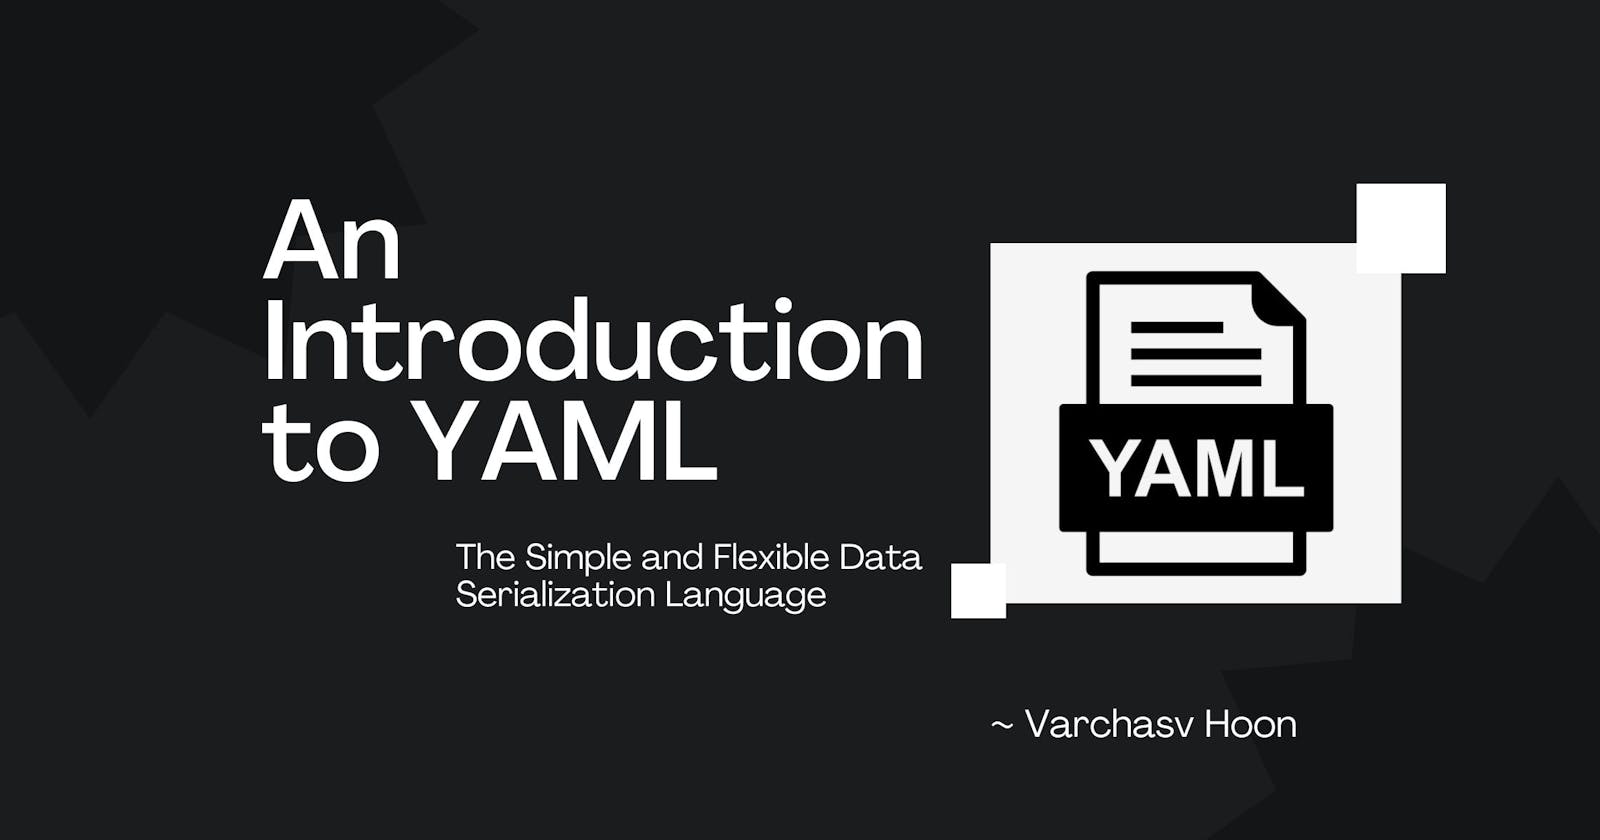 An Introduction to YAML: The Simple and Flexible Data Serialization Language